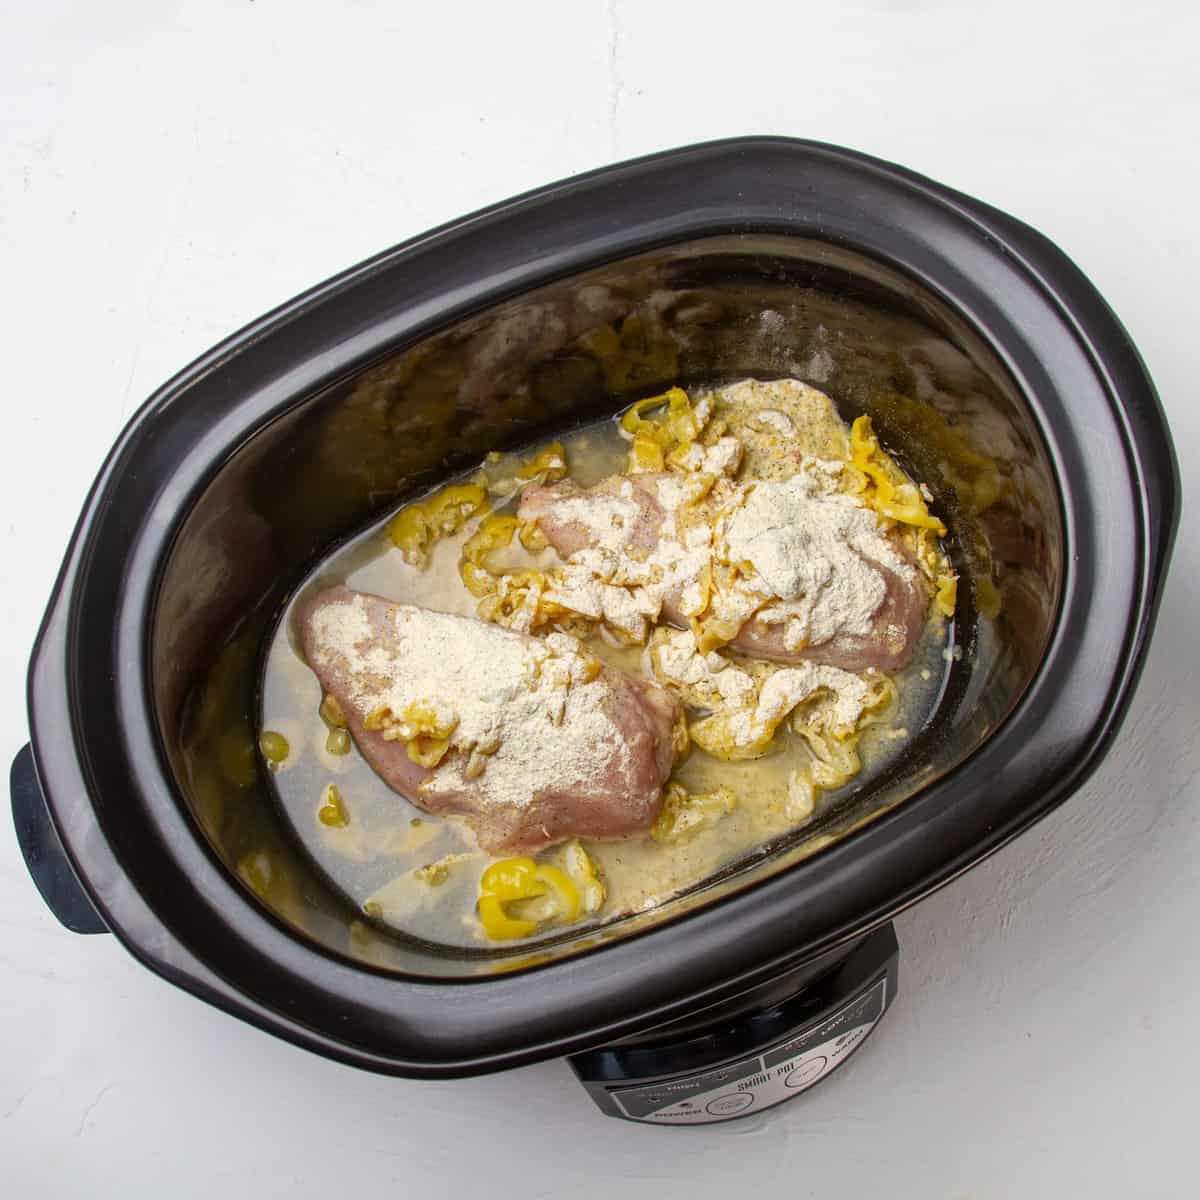 Raw chicken, spices, pickled peppers, and gravy mix in a slow cooker.